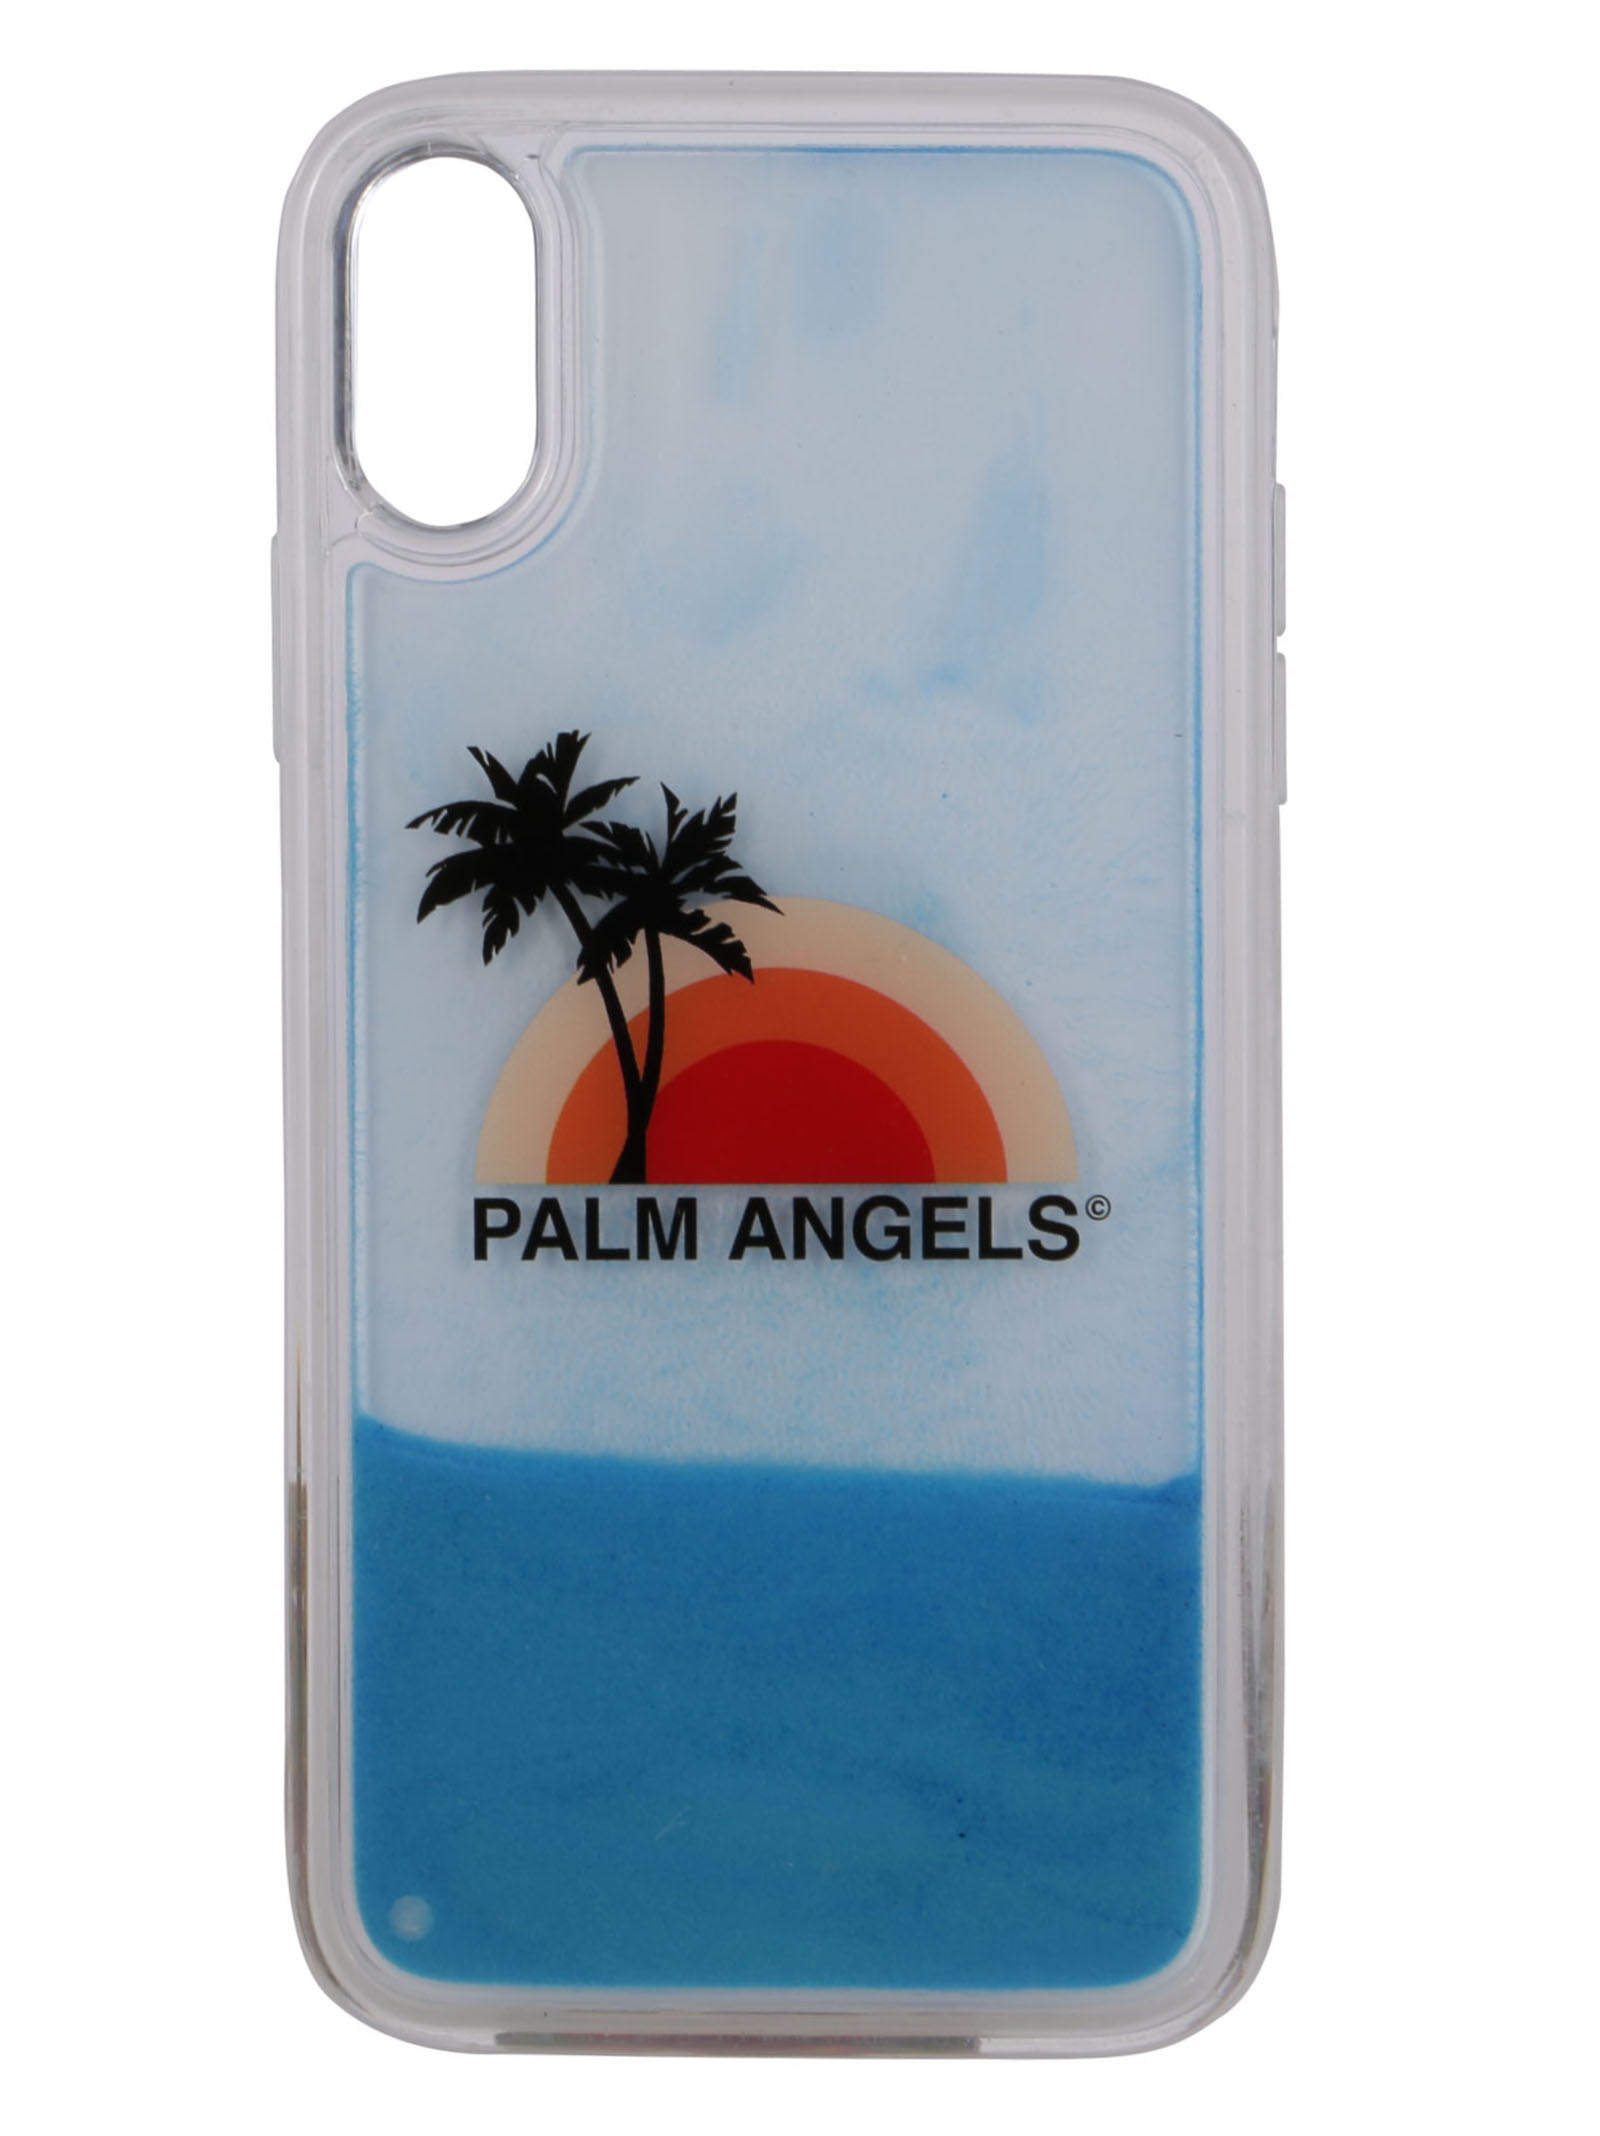 PALM ANGELS MULTICOLOR IPHONE XR CASE,11314766